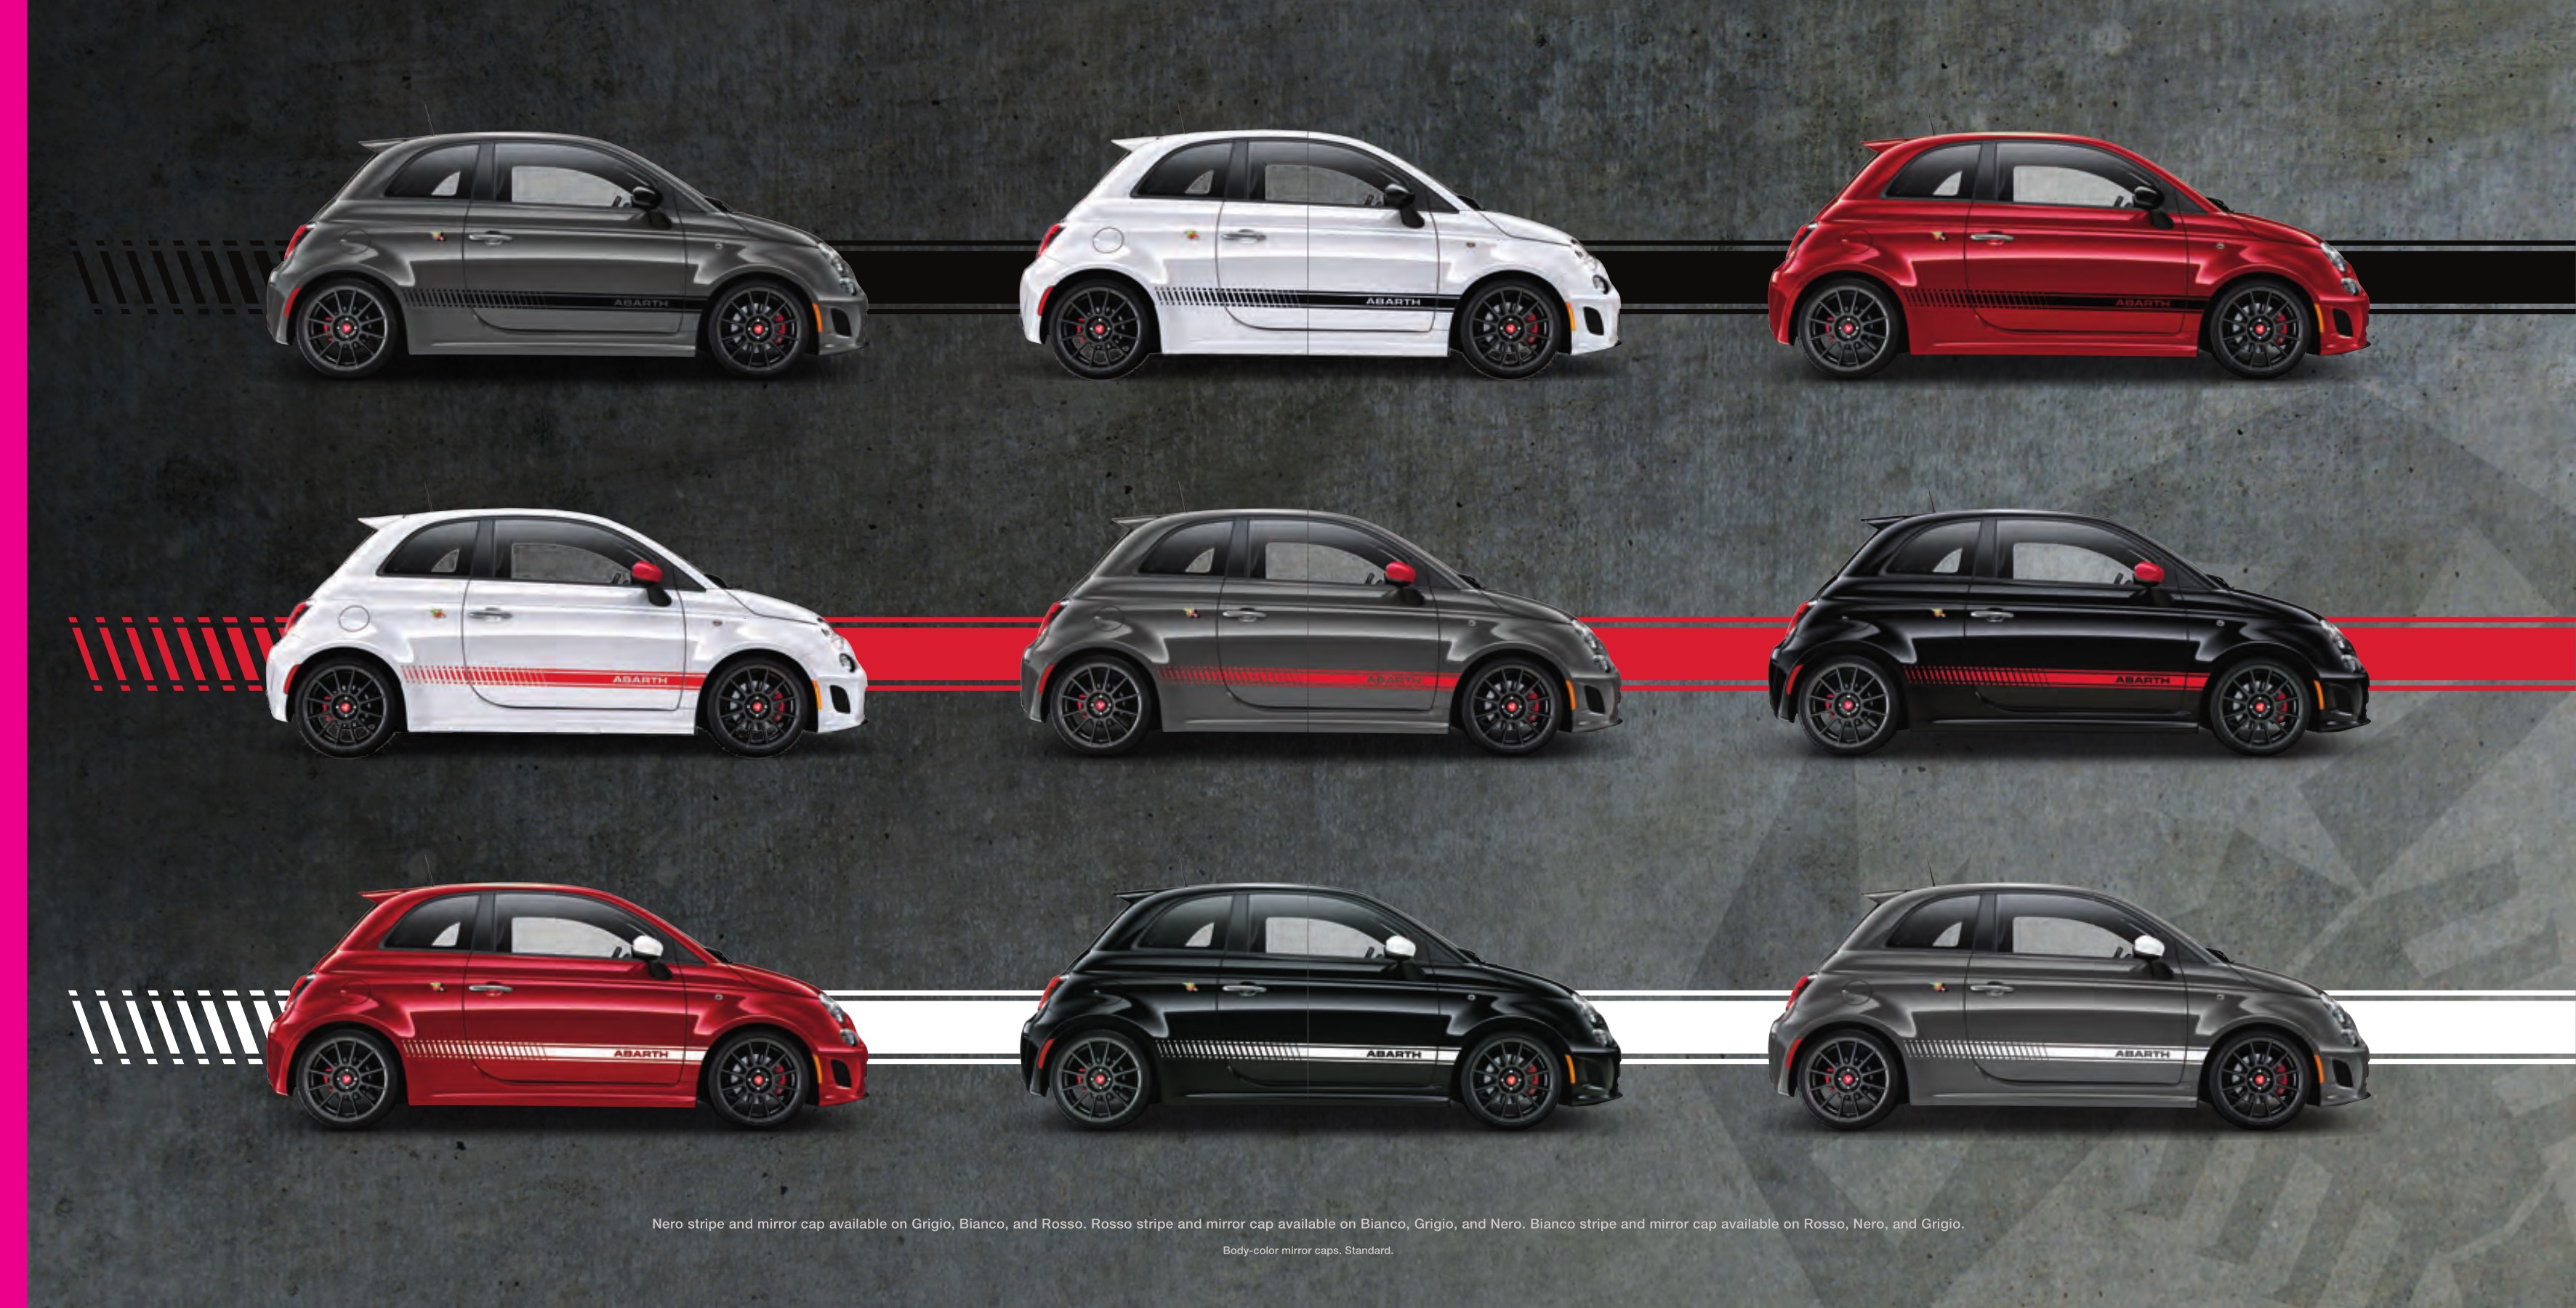 2013 Fiat 500 Abarth Brochure Page 4